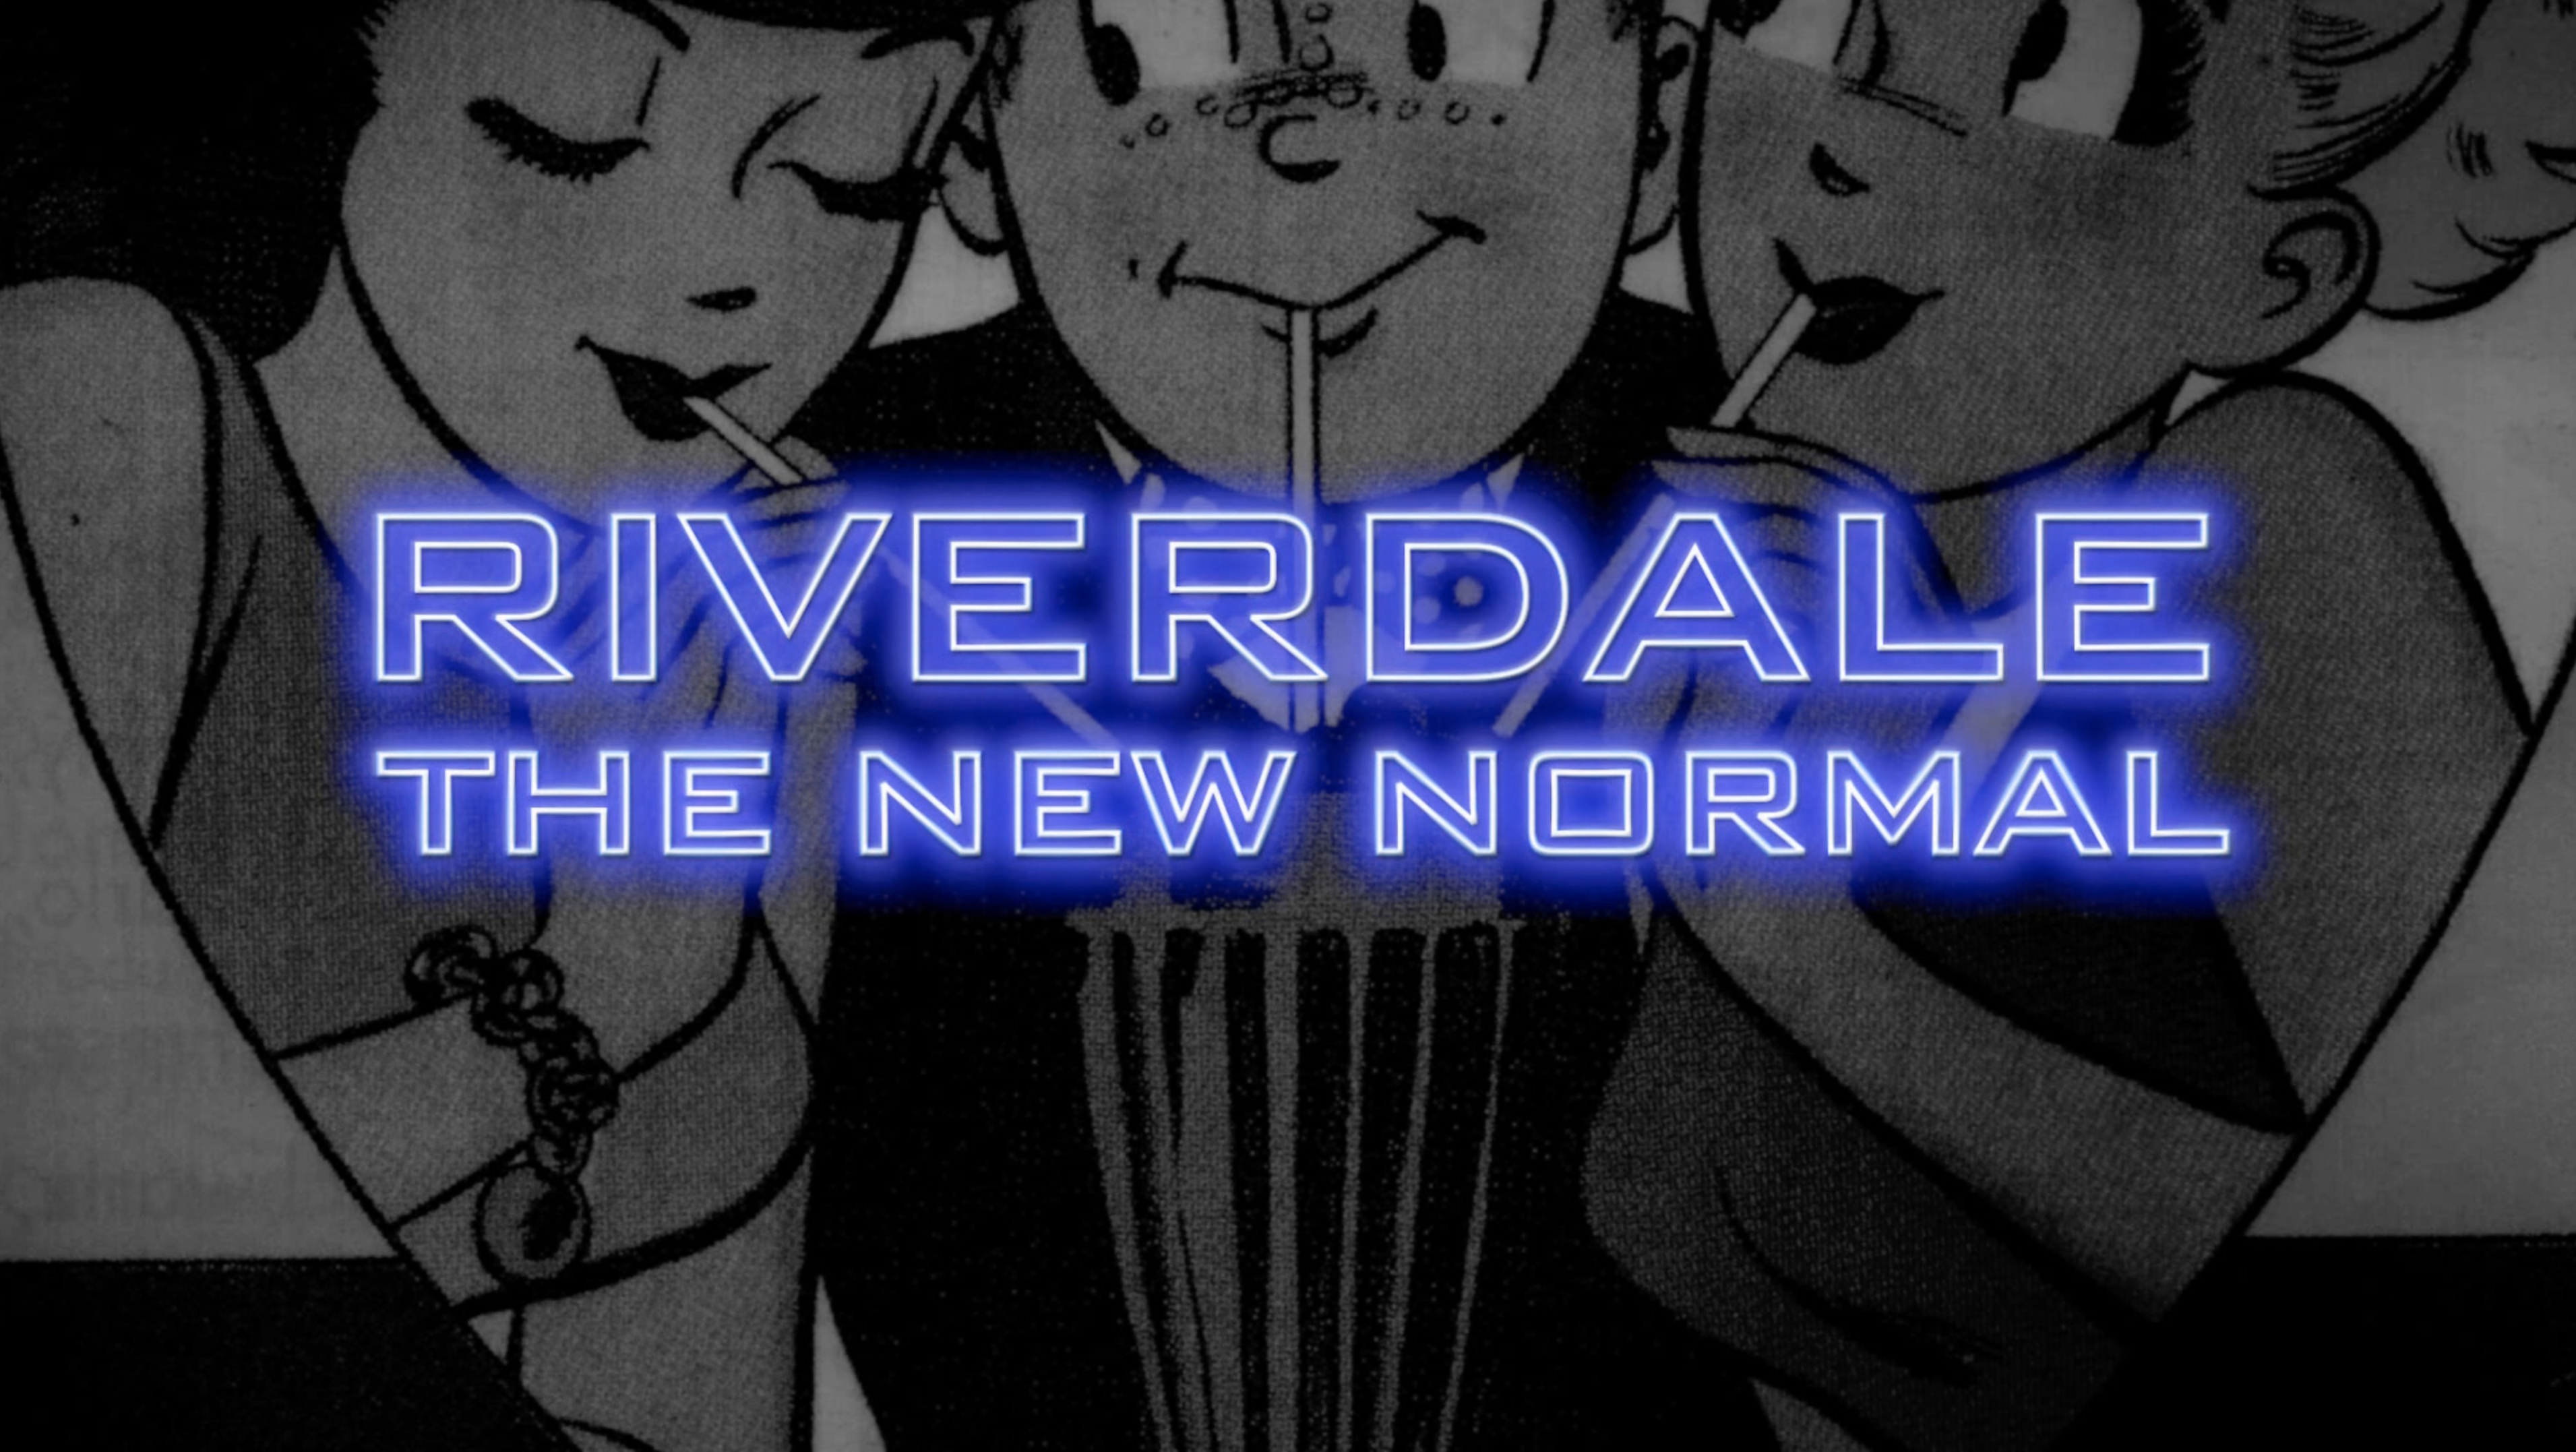 DOCUMENTARY: Riverdale - The New Normal